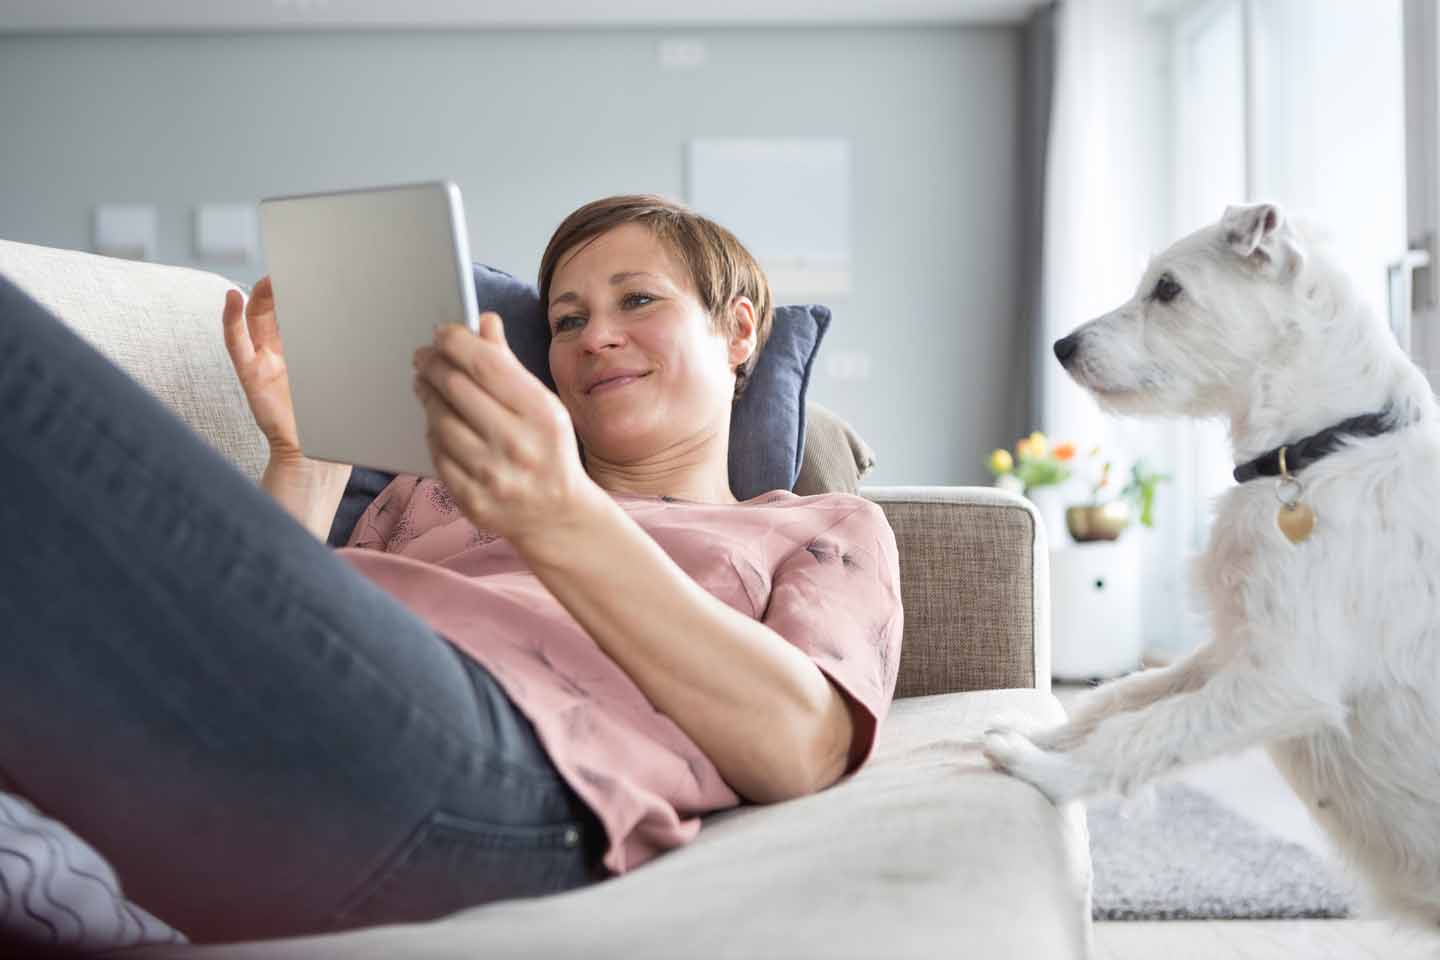 06720697 Portrait of smiling woman lying on the couch using tablet while dog watching her